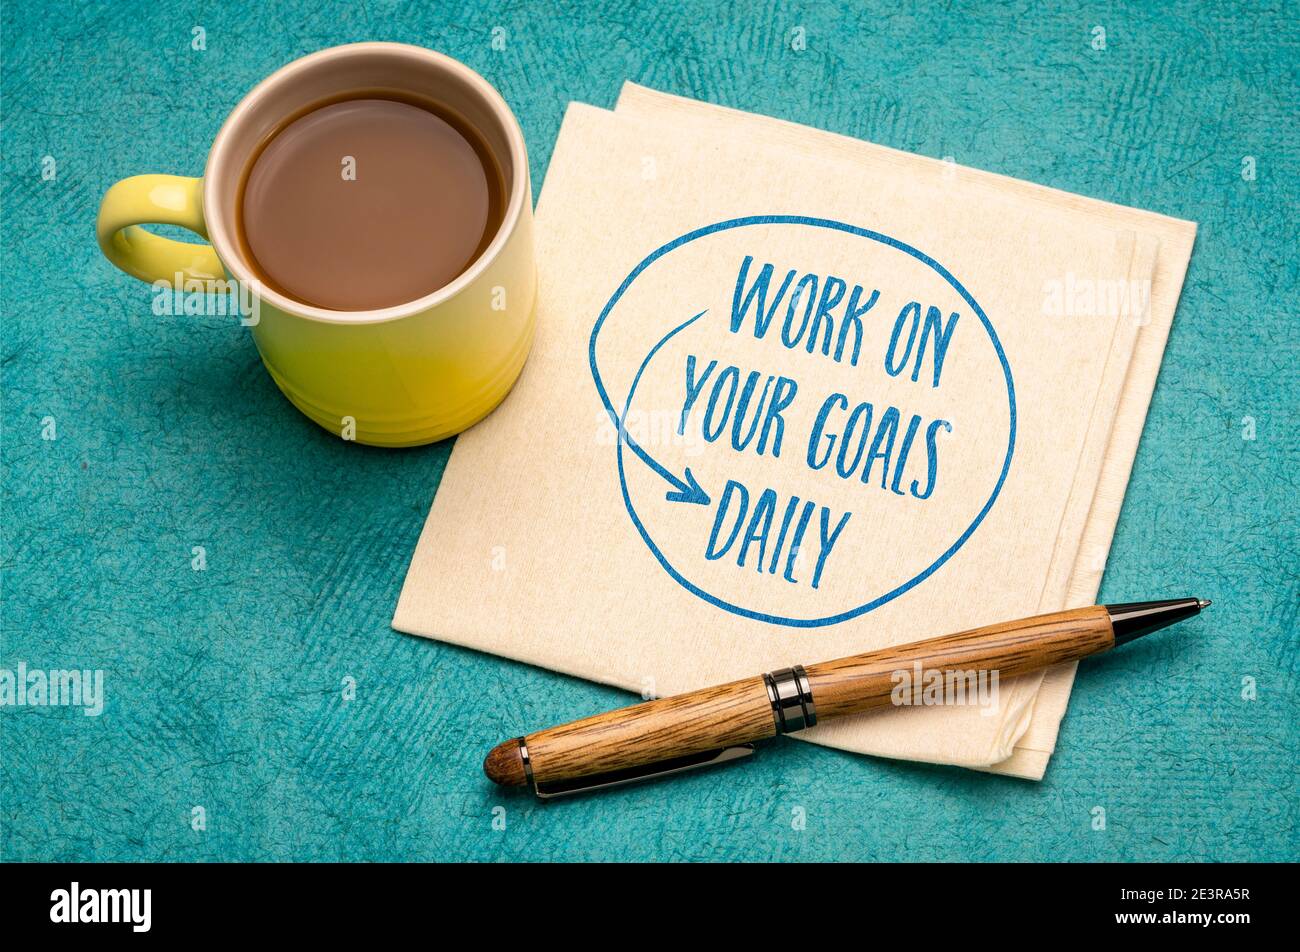 work on your goals daily - motivational reminder, handwriting on a napkin with a cup of coffee, goal setting, business and personal development concep Stock Photo